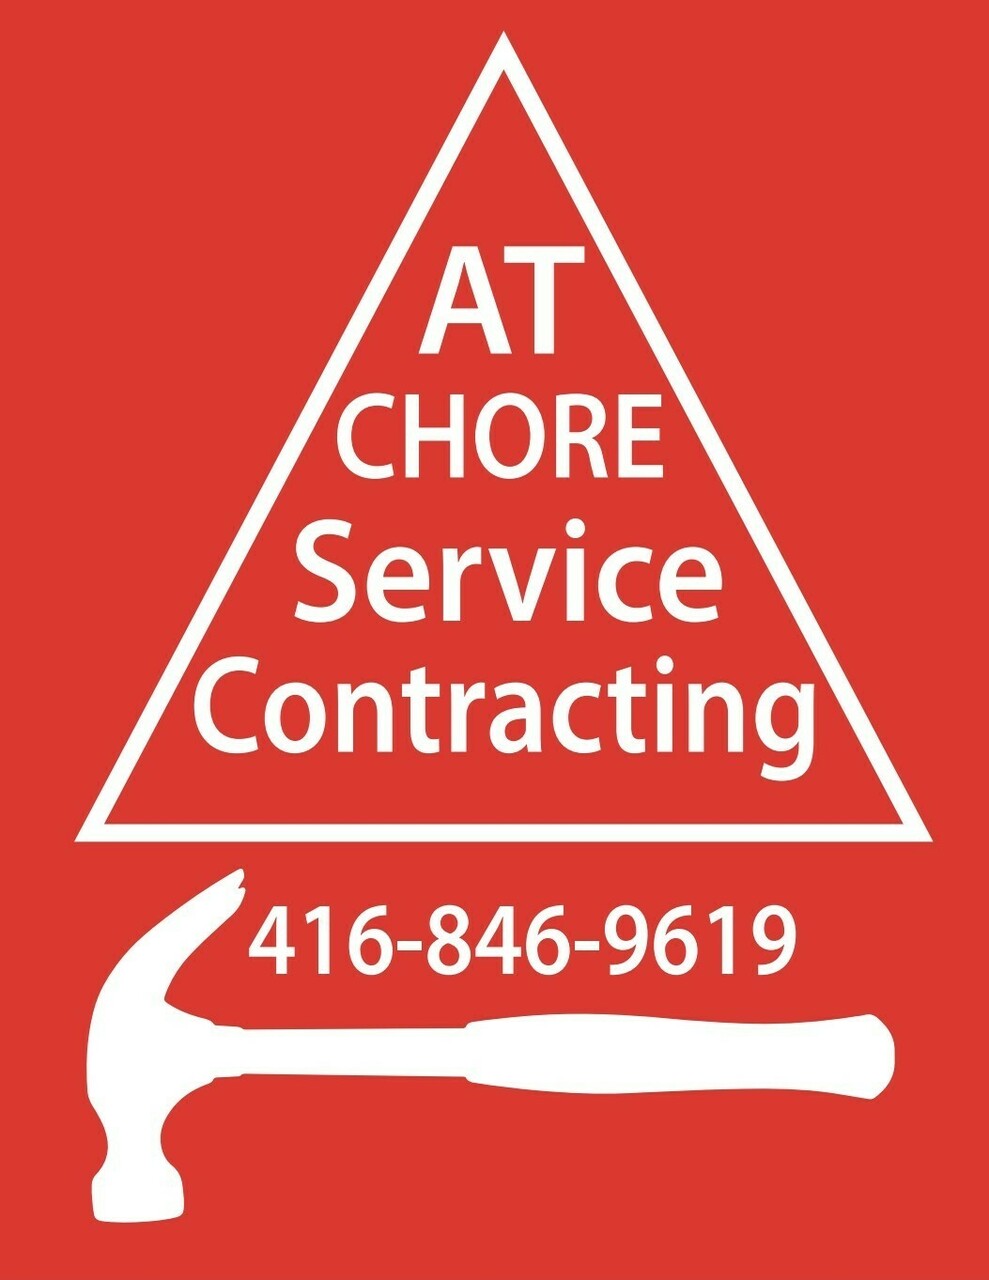 At Chore Service Contracting's logo